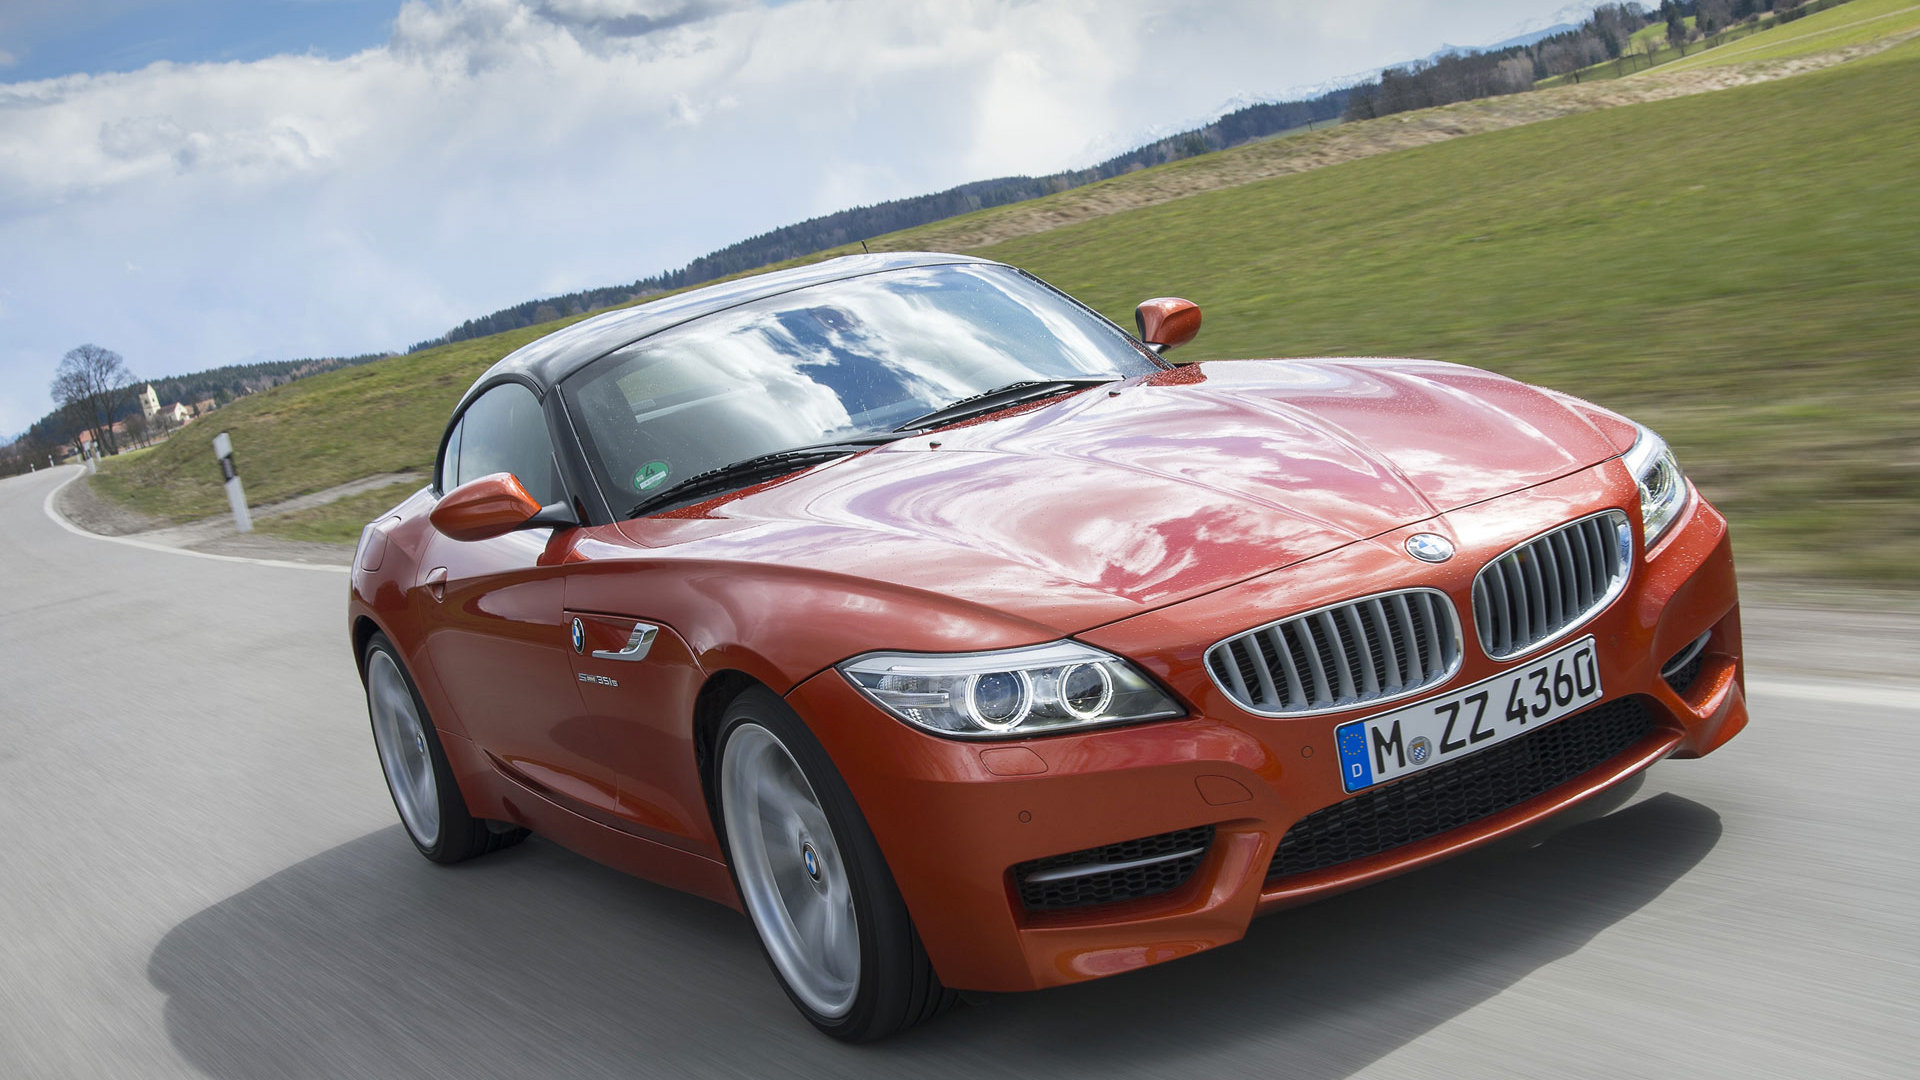 Awesome BMW Z4 free wallpaper ID:466949 for hd 1080p computer